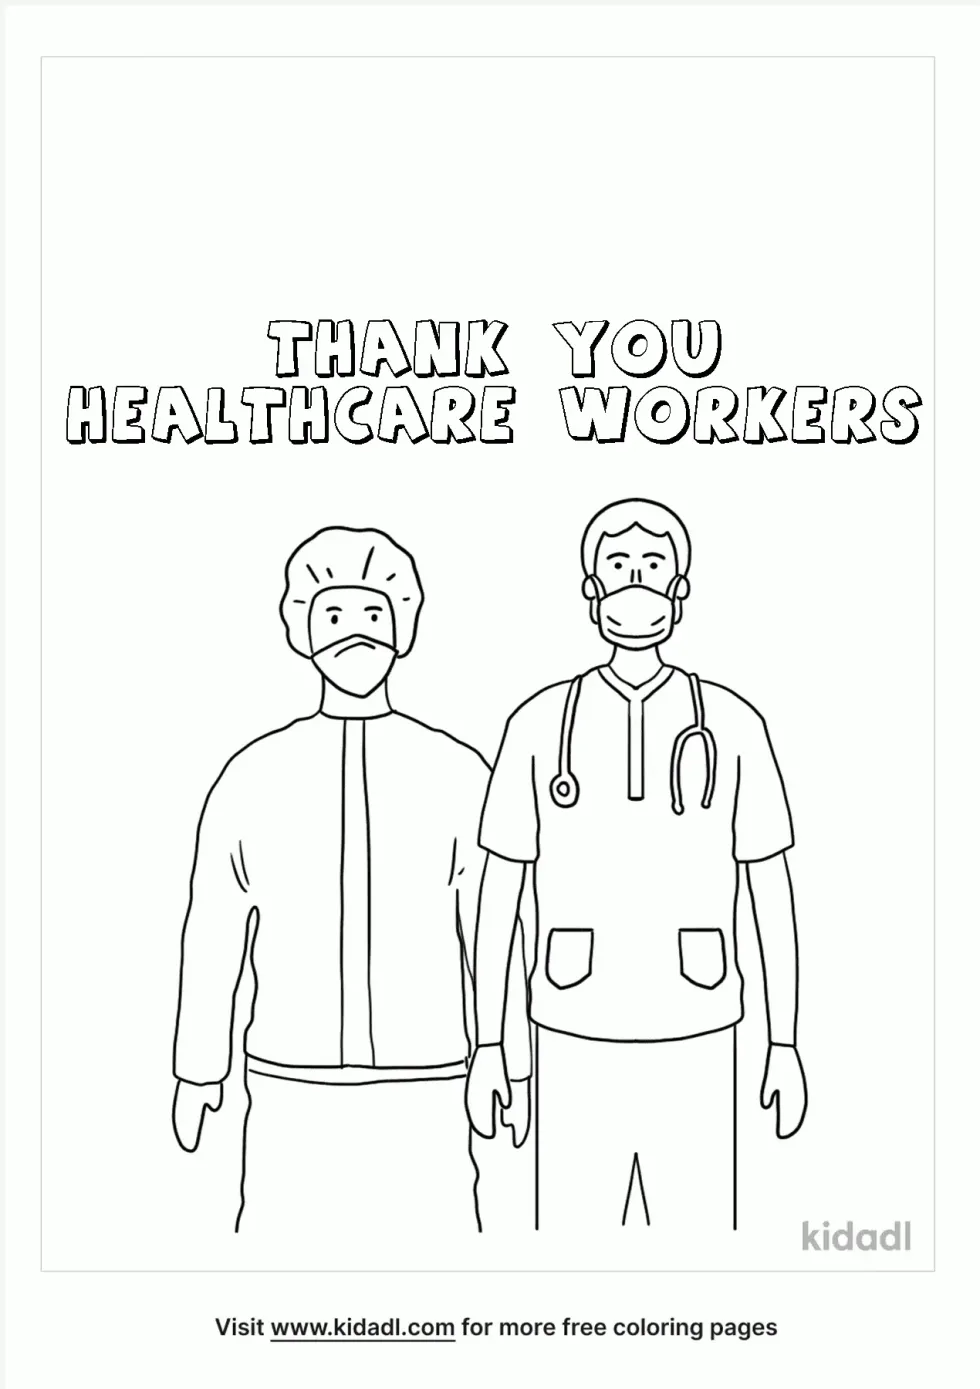 Thank You Healthcare Workers Coloring Page